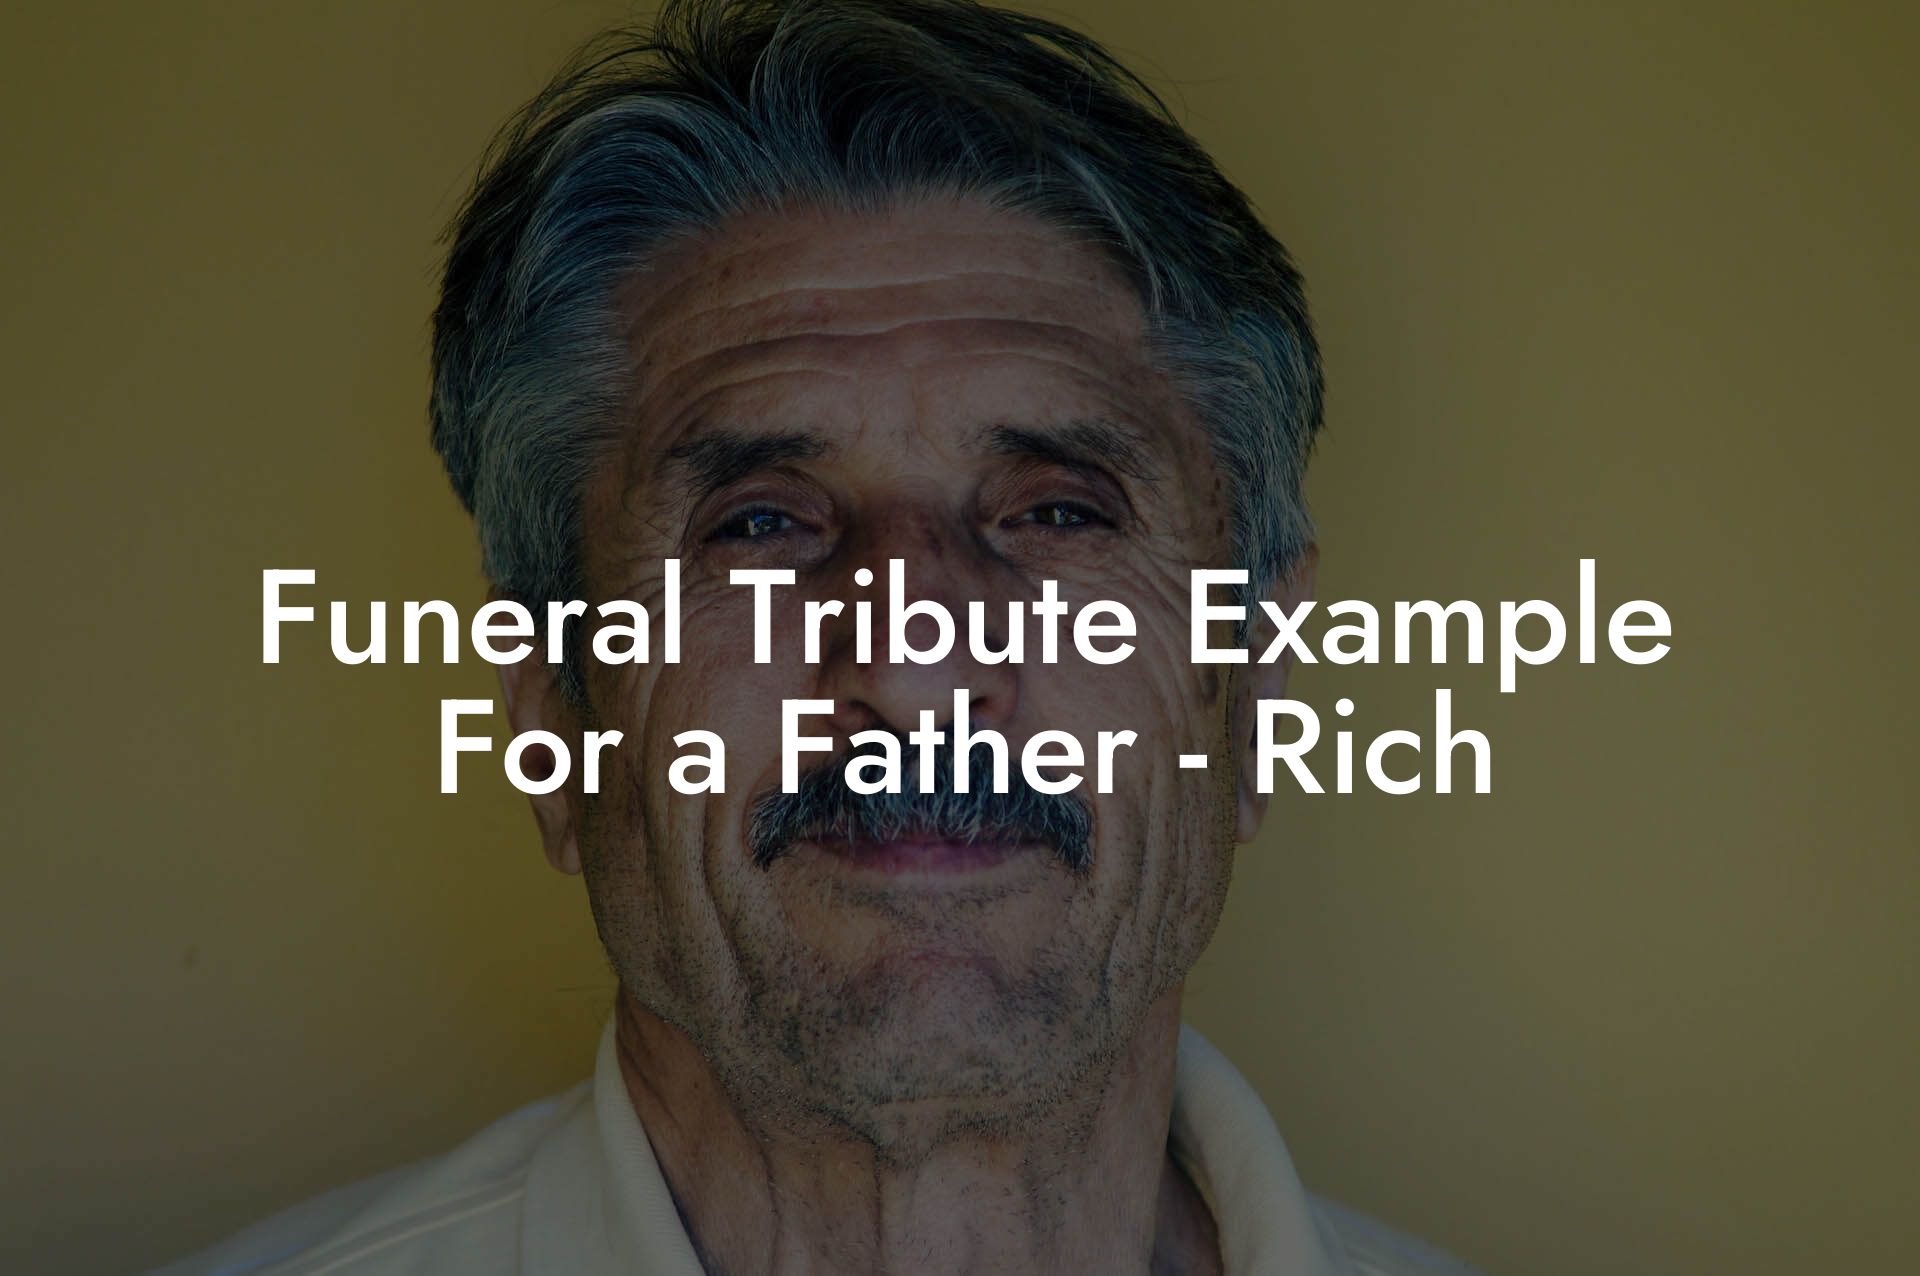 Funeral Tribute Example For a Father - Rich